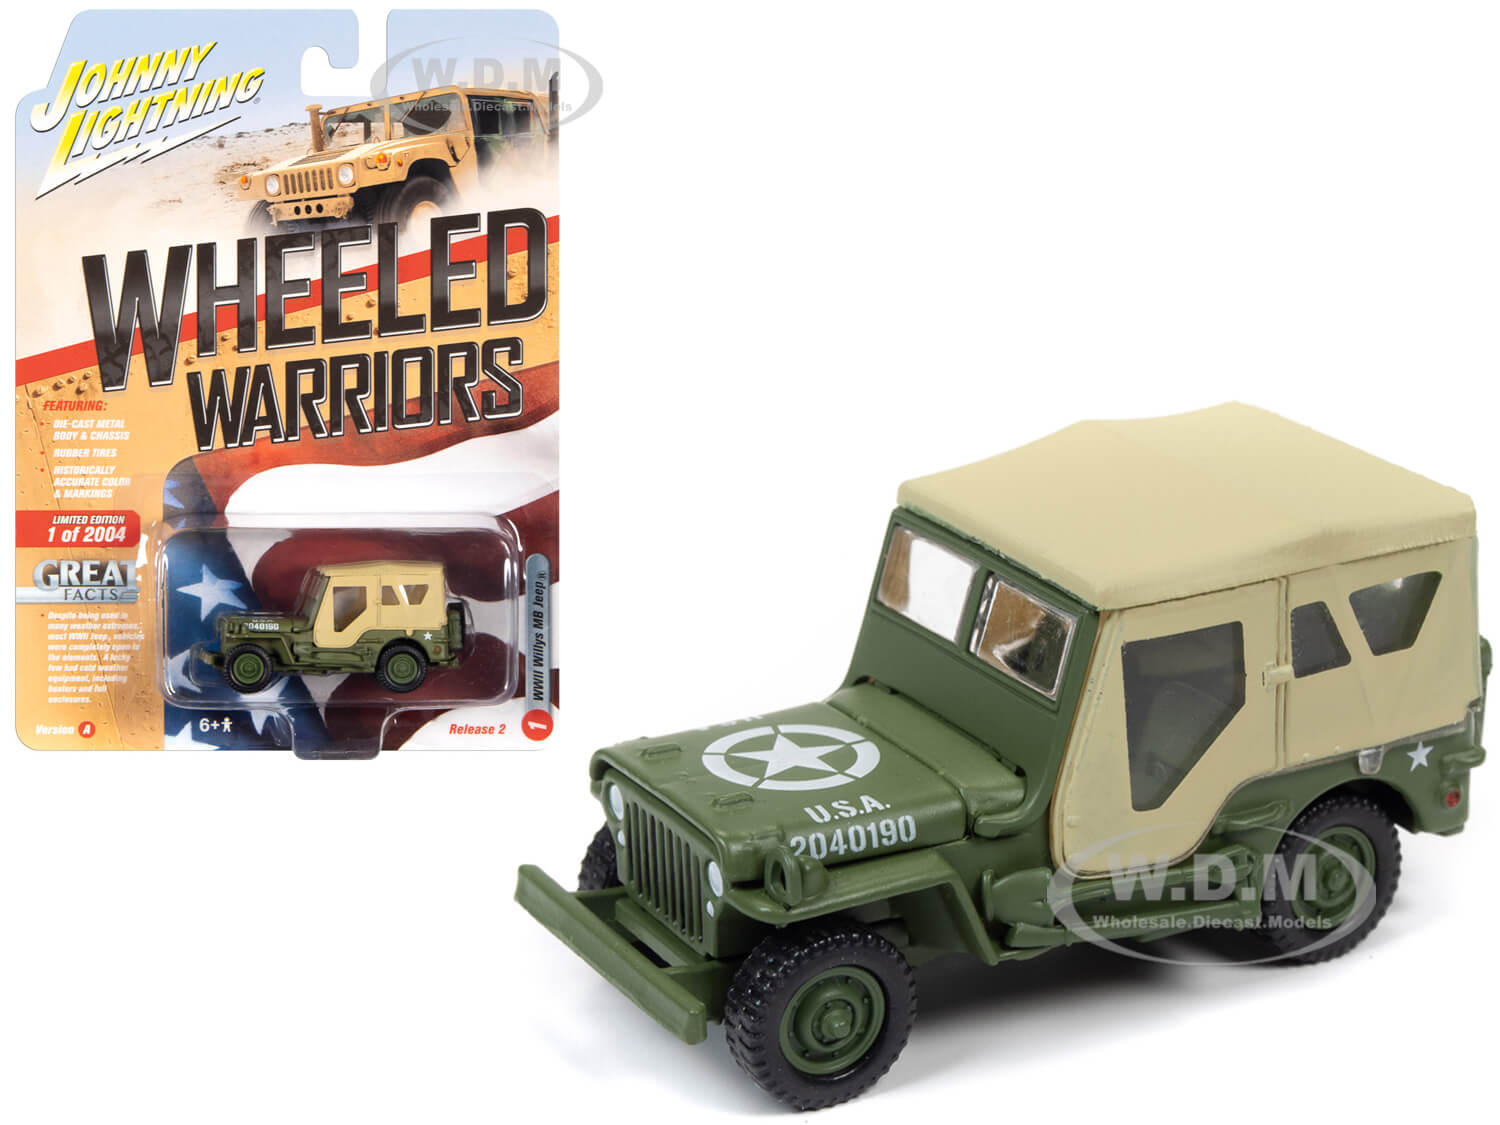 Willys Mb Jeep Olive Drab With Tan Top "u.s.a" (world War Ii) "wheeled Warriors" Series 2 Limited Edition To 2004 Pieces Worldwide 1/64 Diecast Model